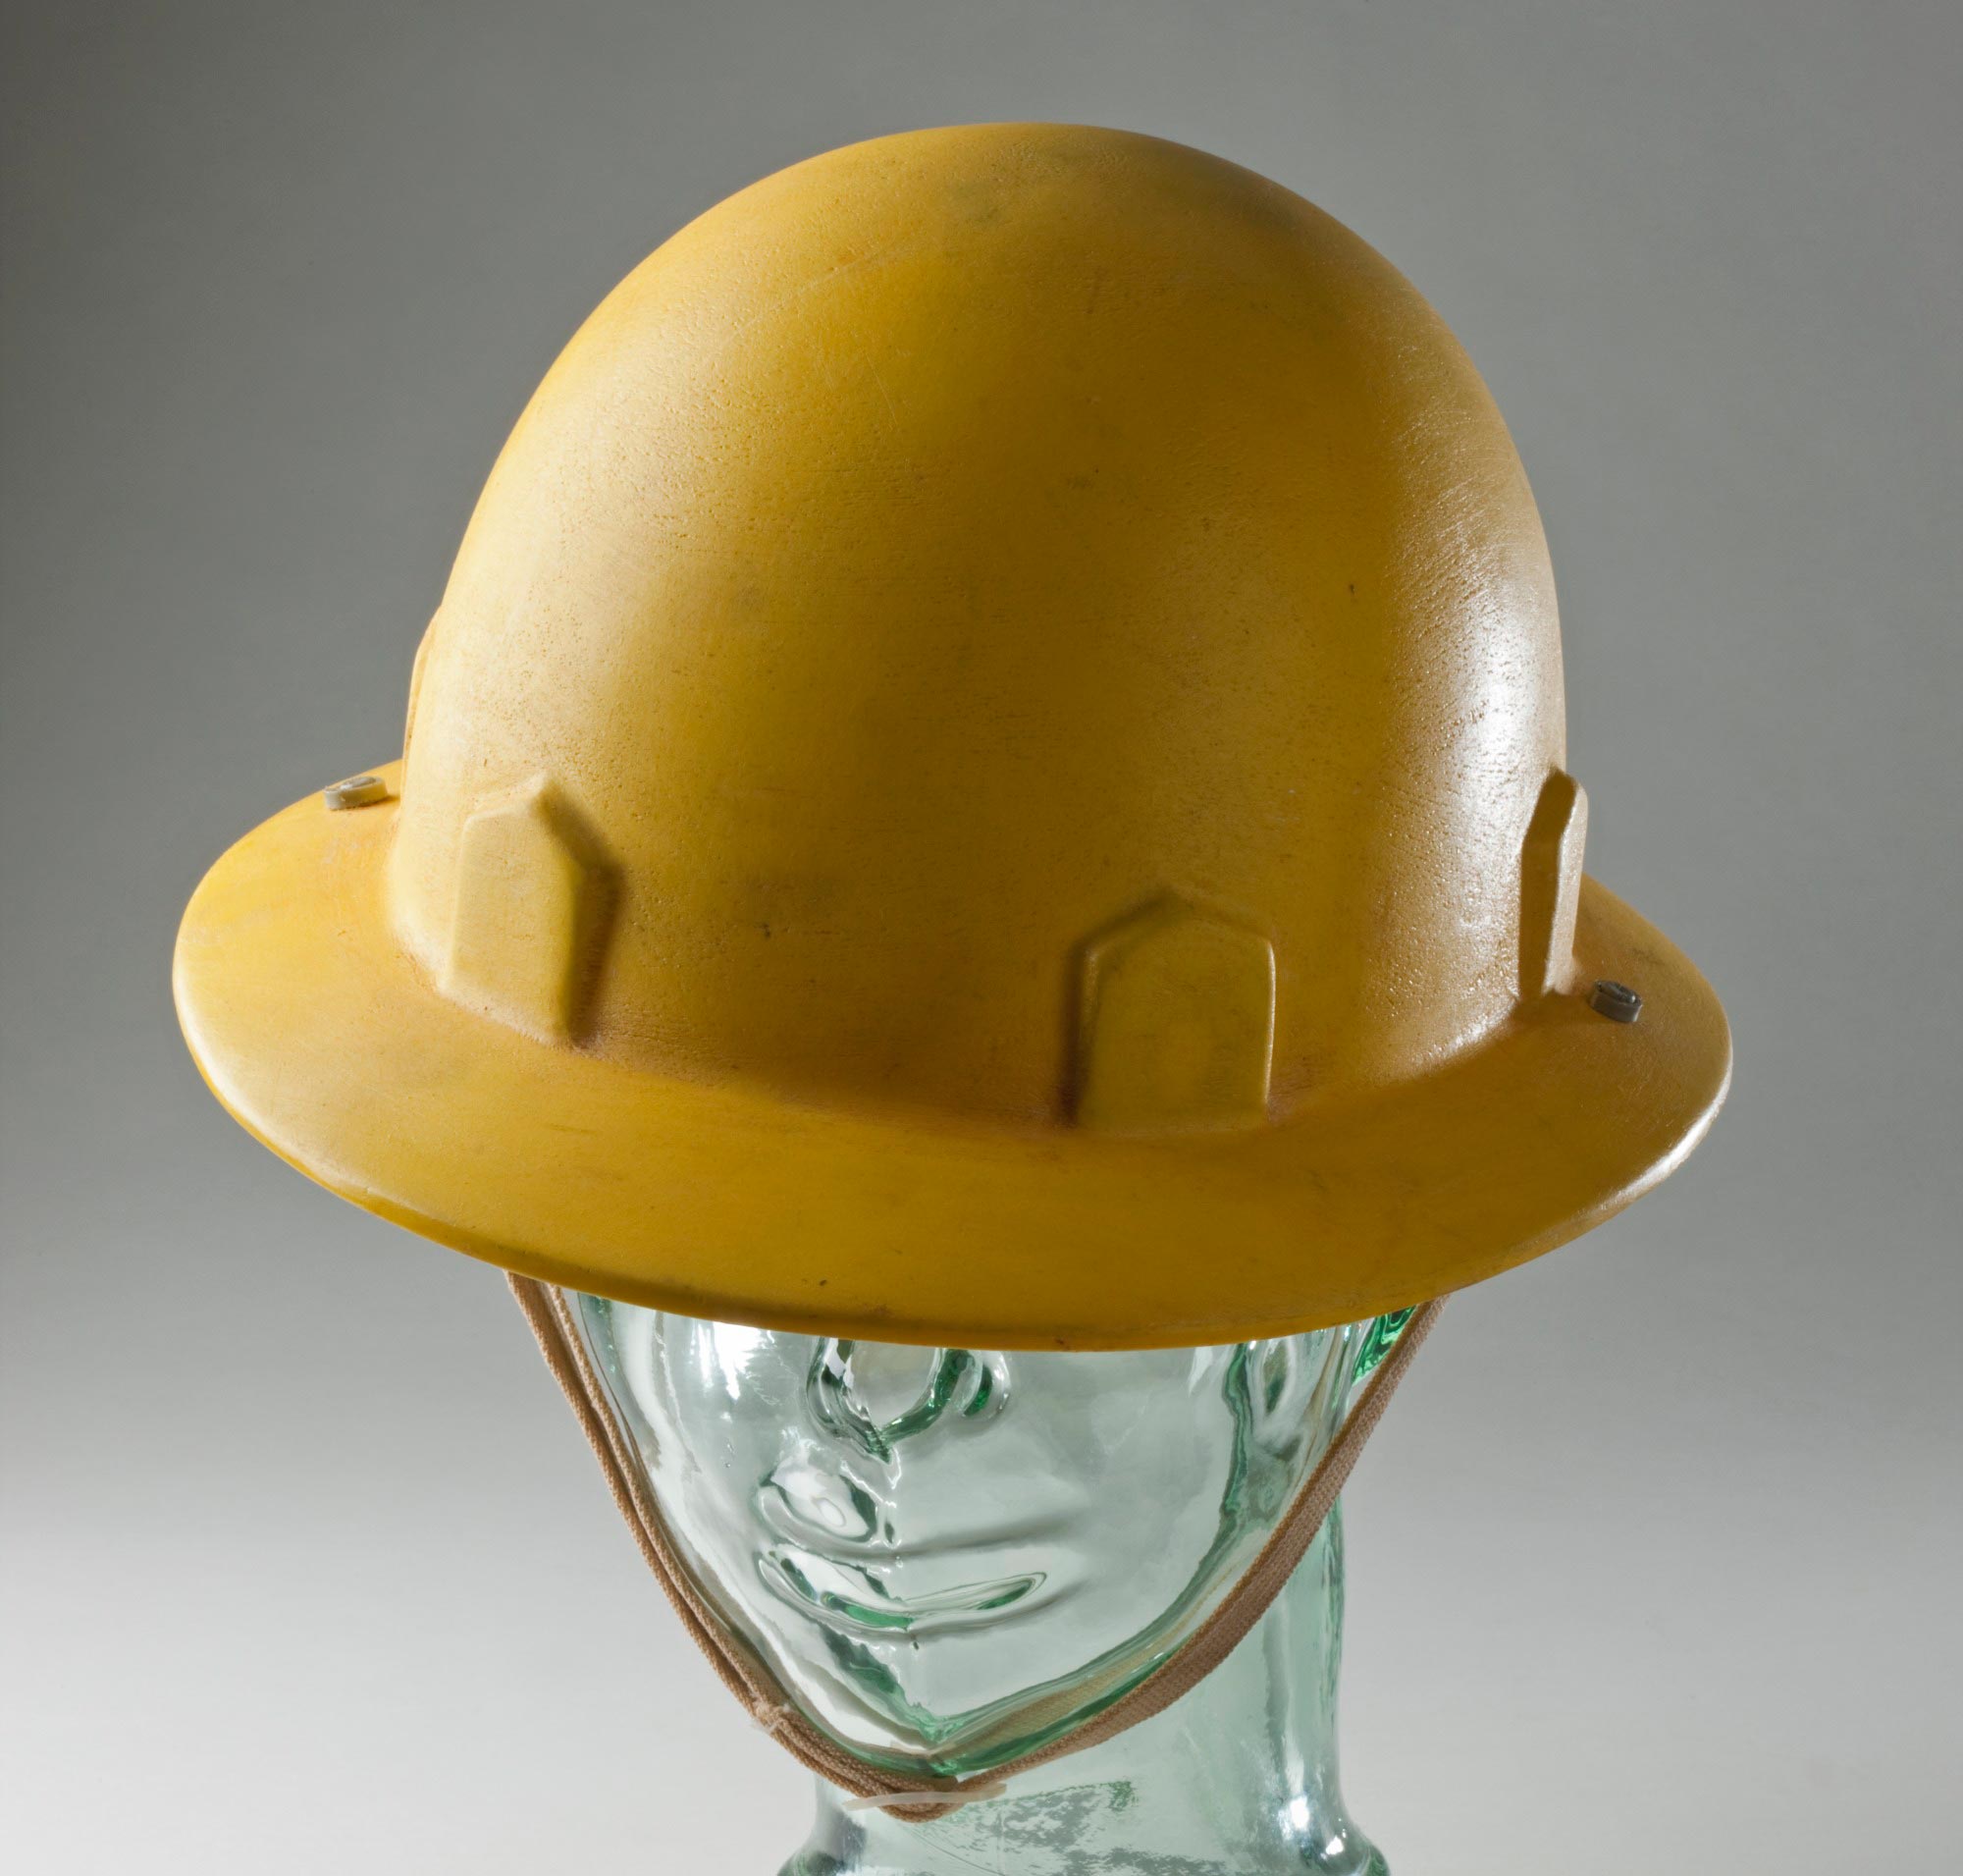 Moulded yellow plastic hard hat used by a worker on the Snowy Mountains Hydro-Electric Scheme.